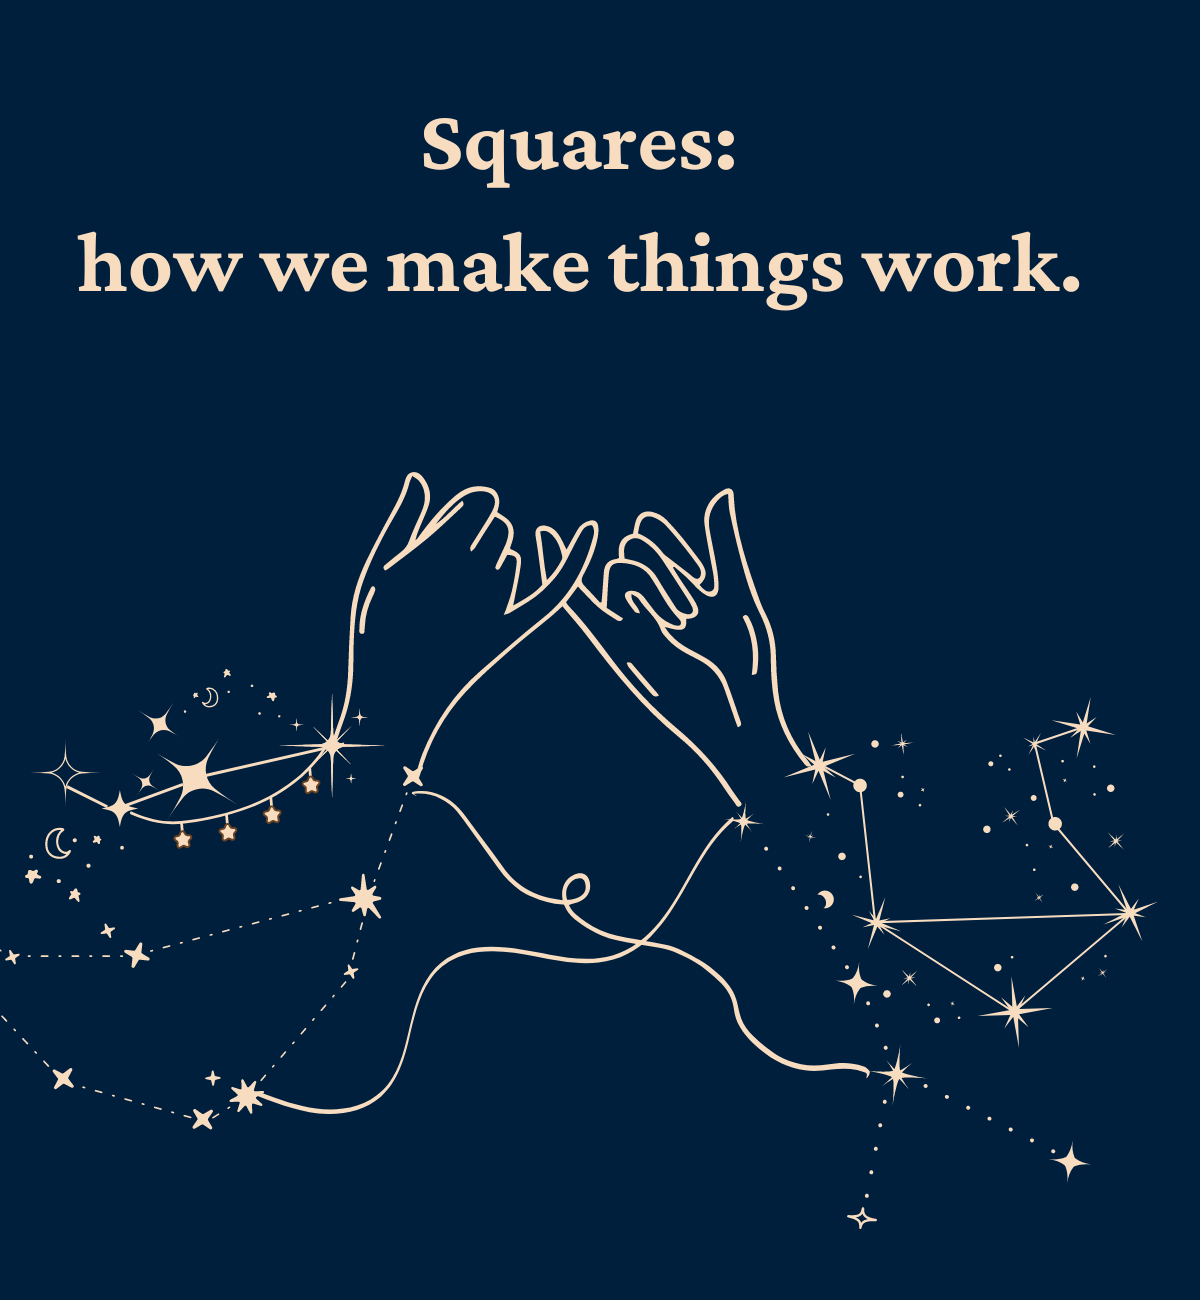 Two hands making a pinky promise with cardinal zodiac sign constellations text: "squares: how we make things work"